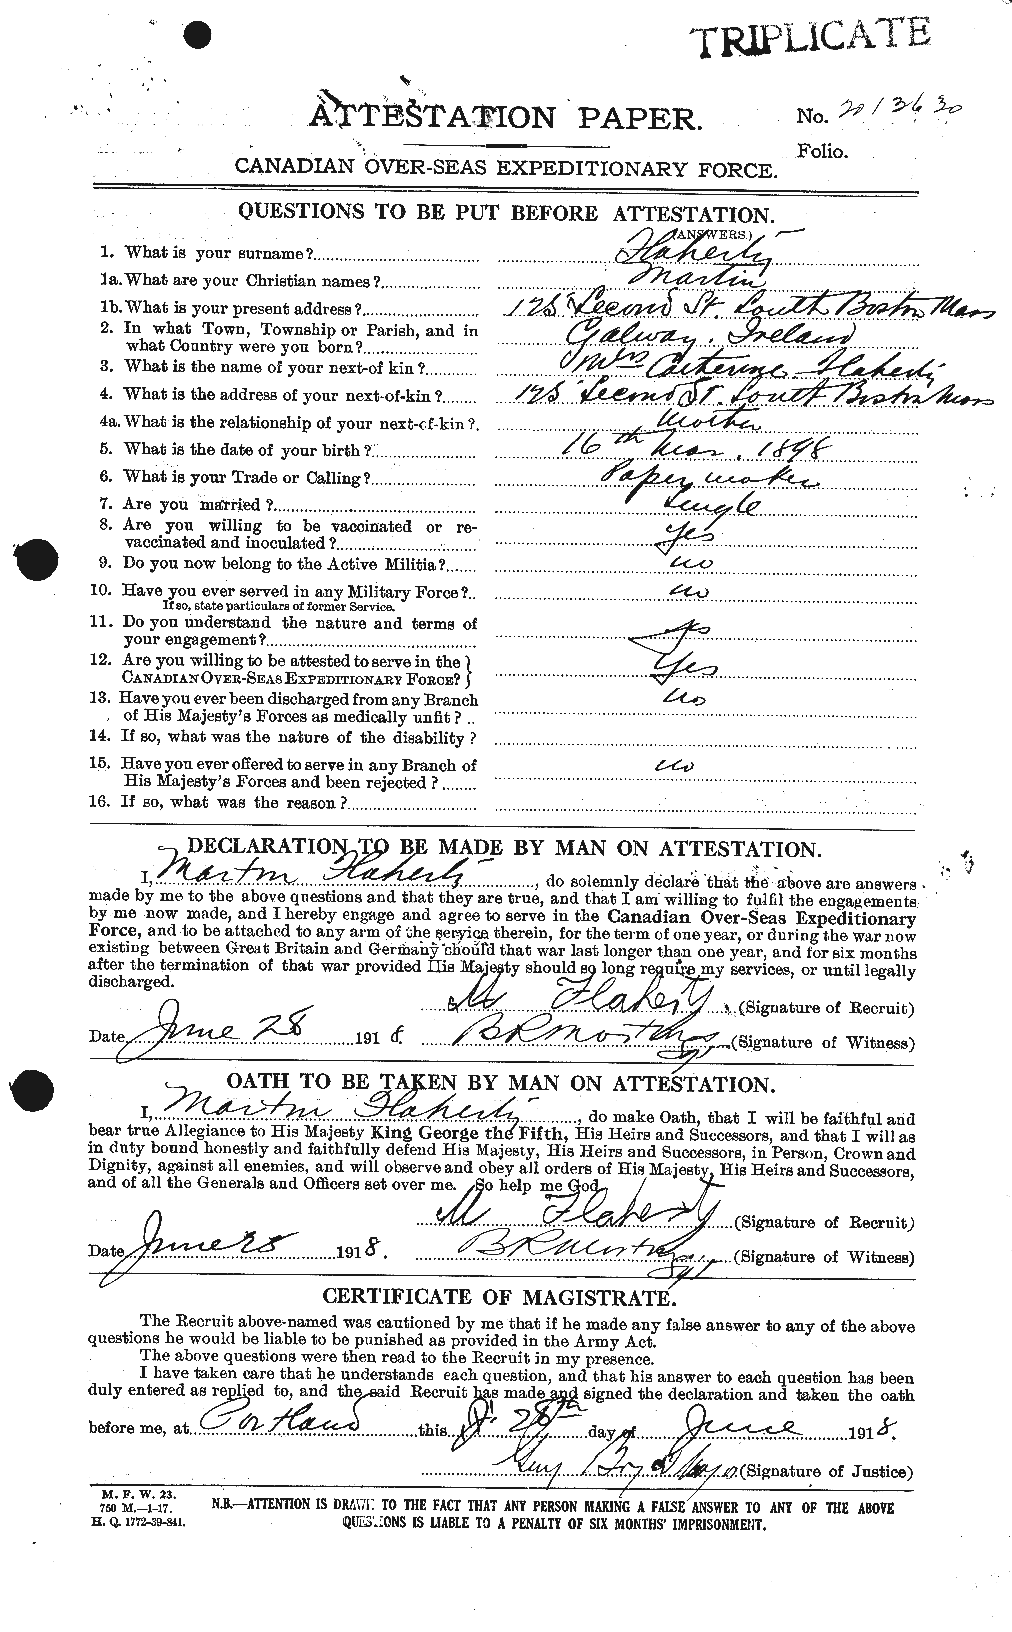 Personnel Records of the First World War - CEF 323370a